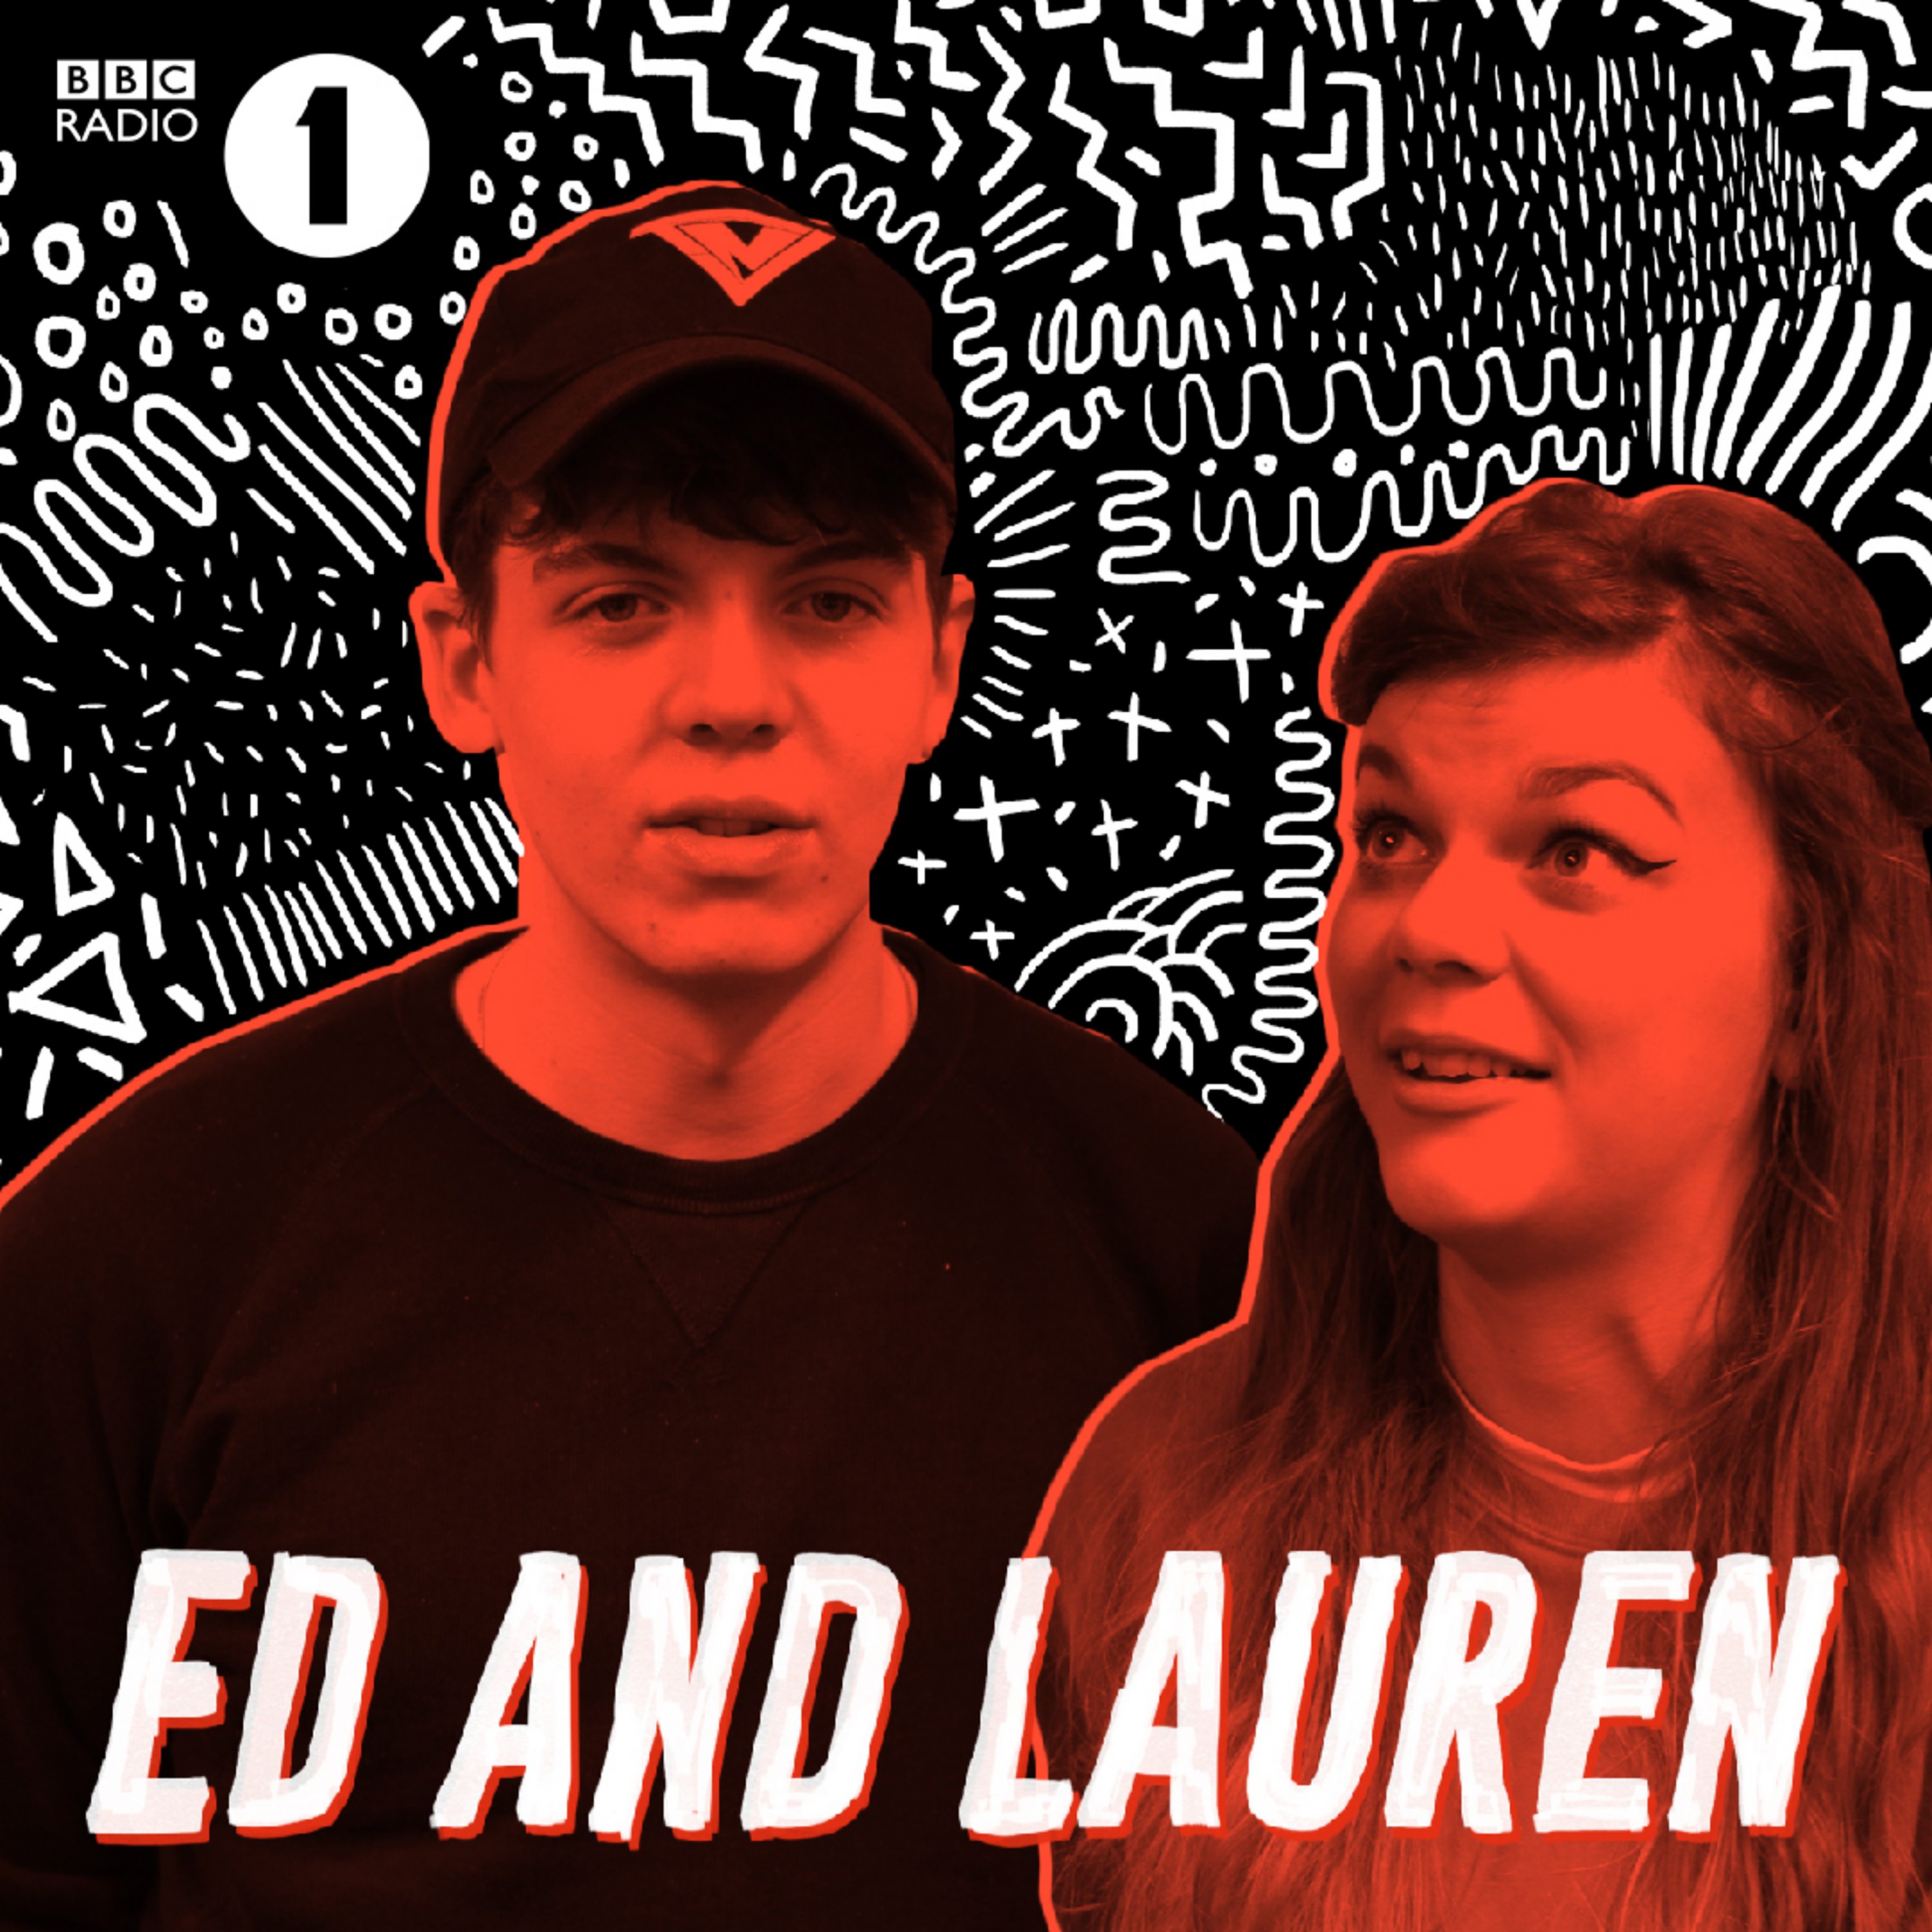 BIG NEWS! Ed and Lauren are back